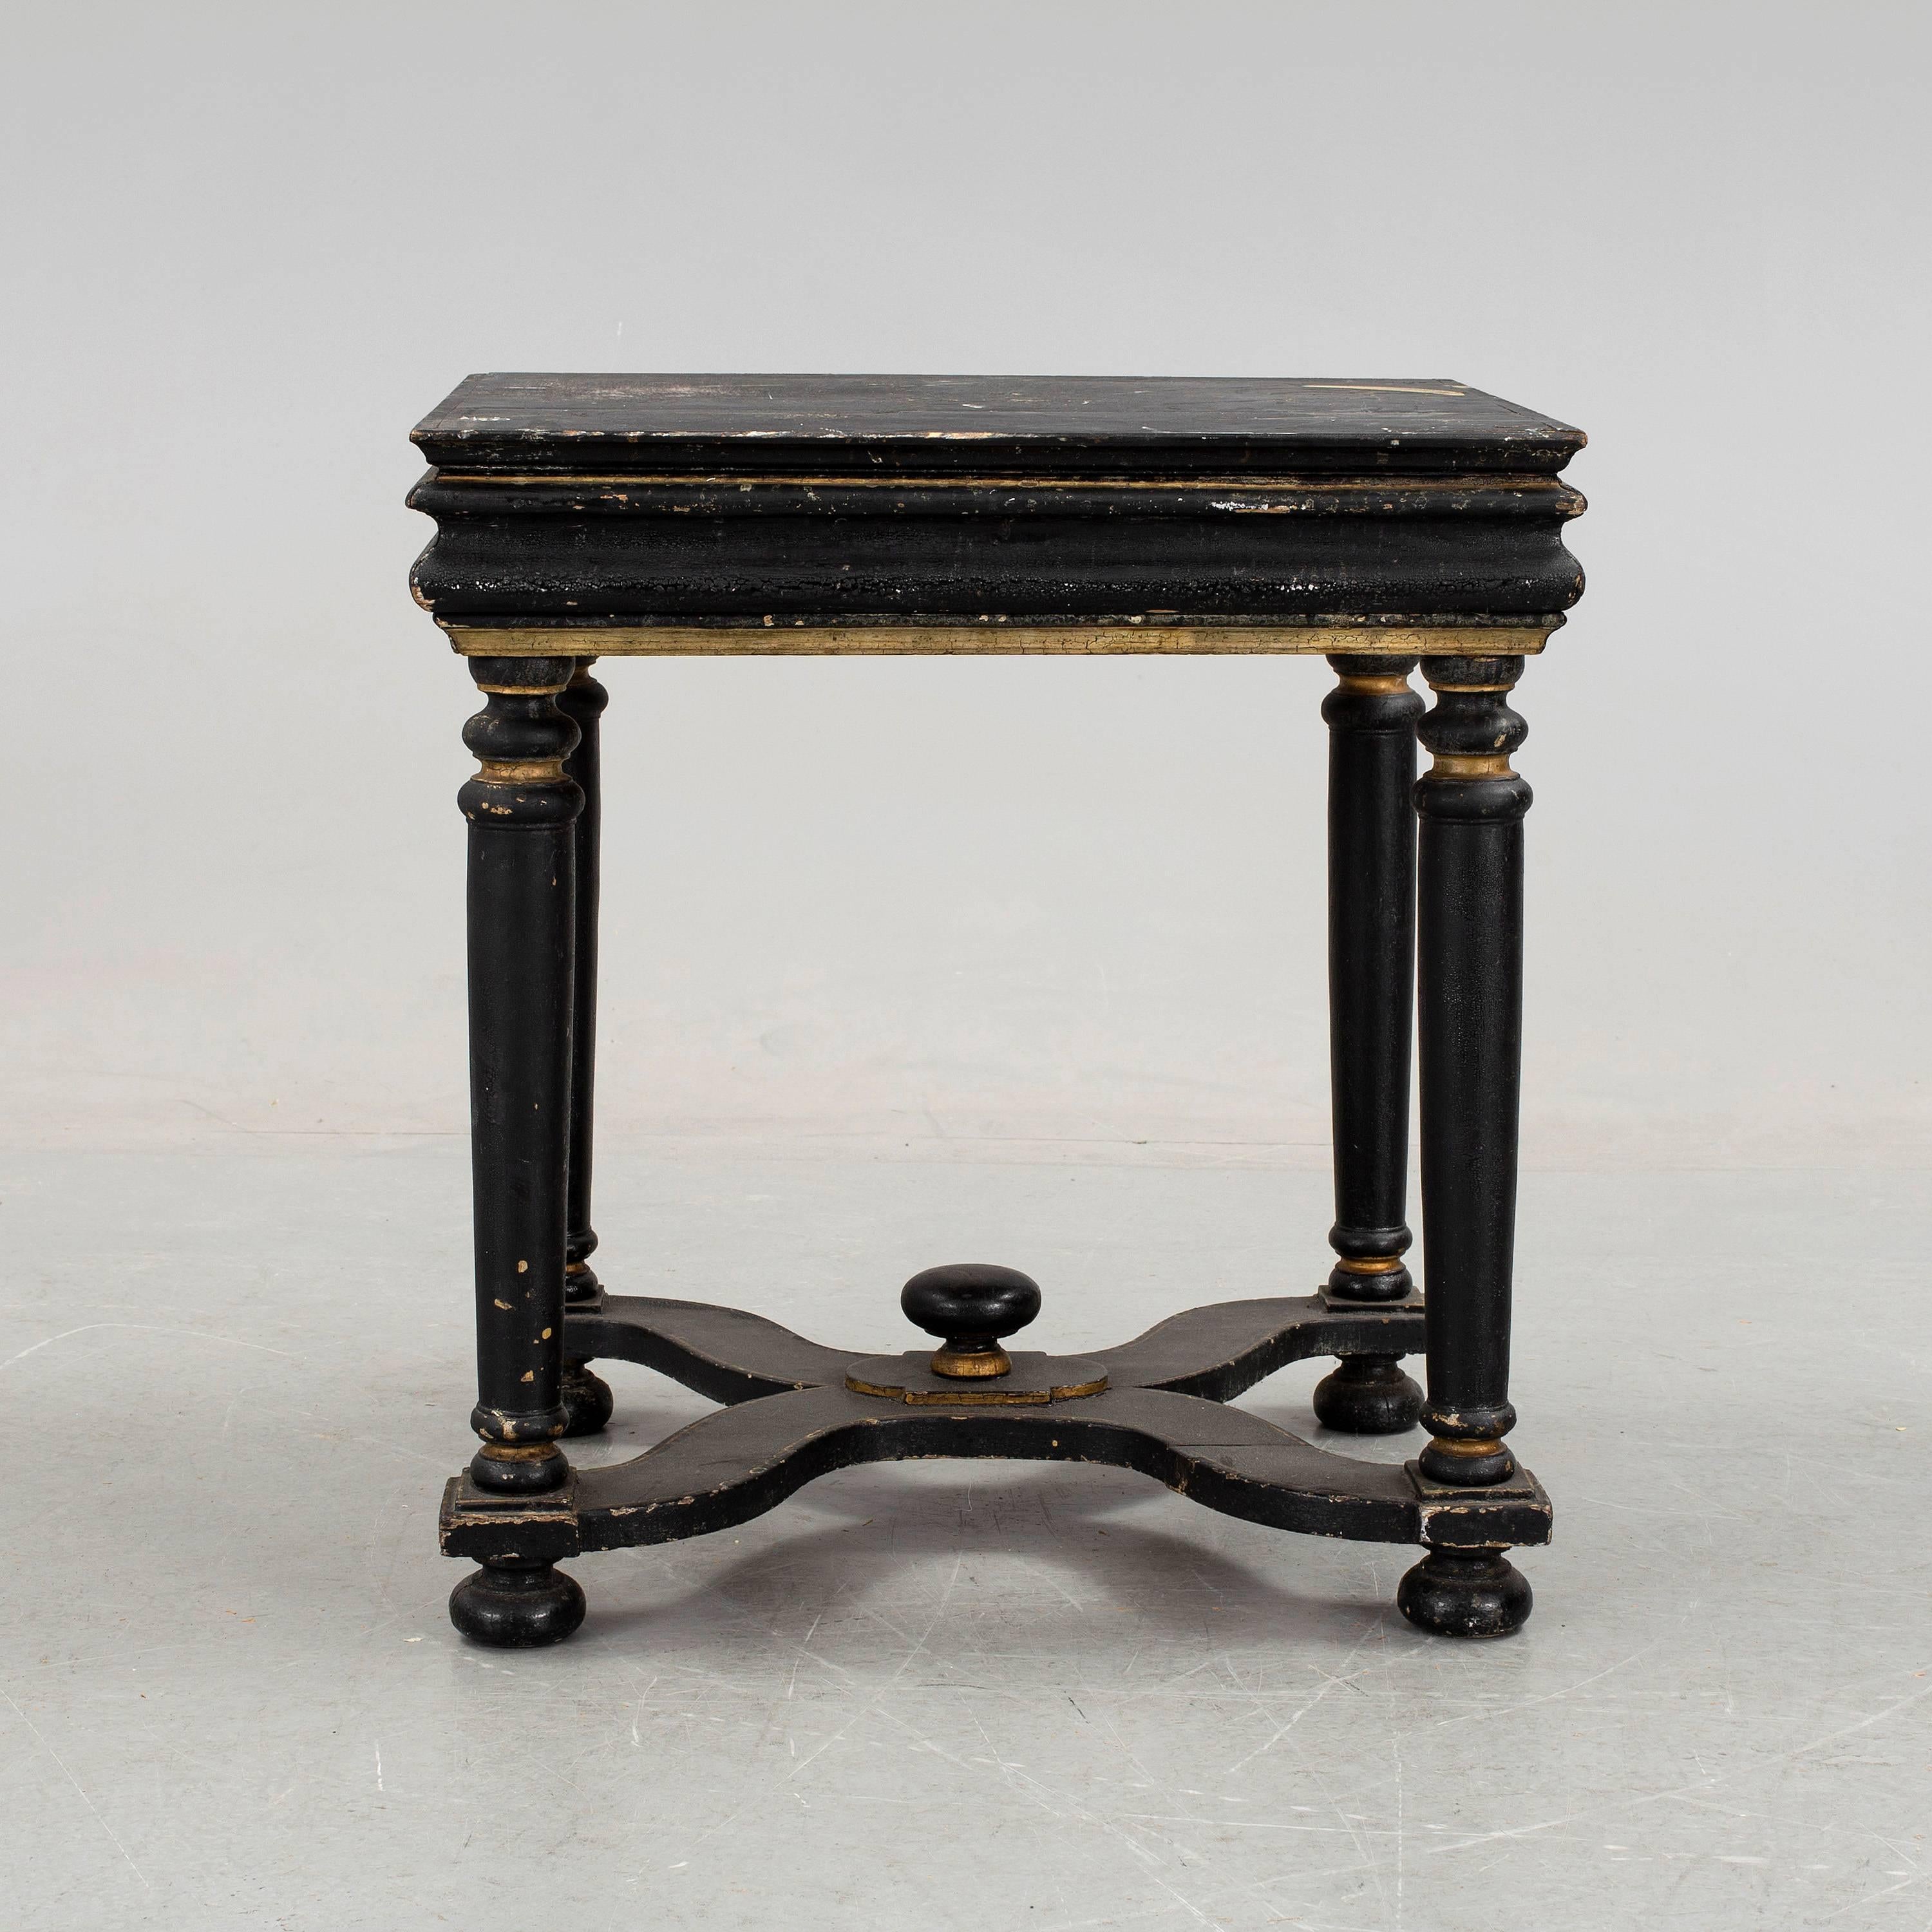 18th century Swedish Baroque console table with big hidden drawer in original black and bronze patina, circa 1730.

Good condition. Wear consistent with age and use.